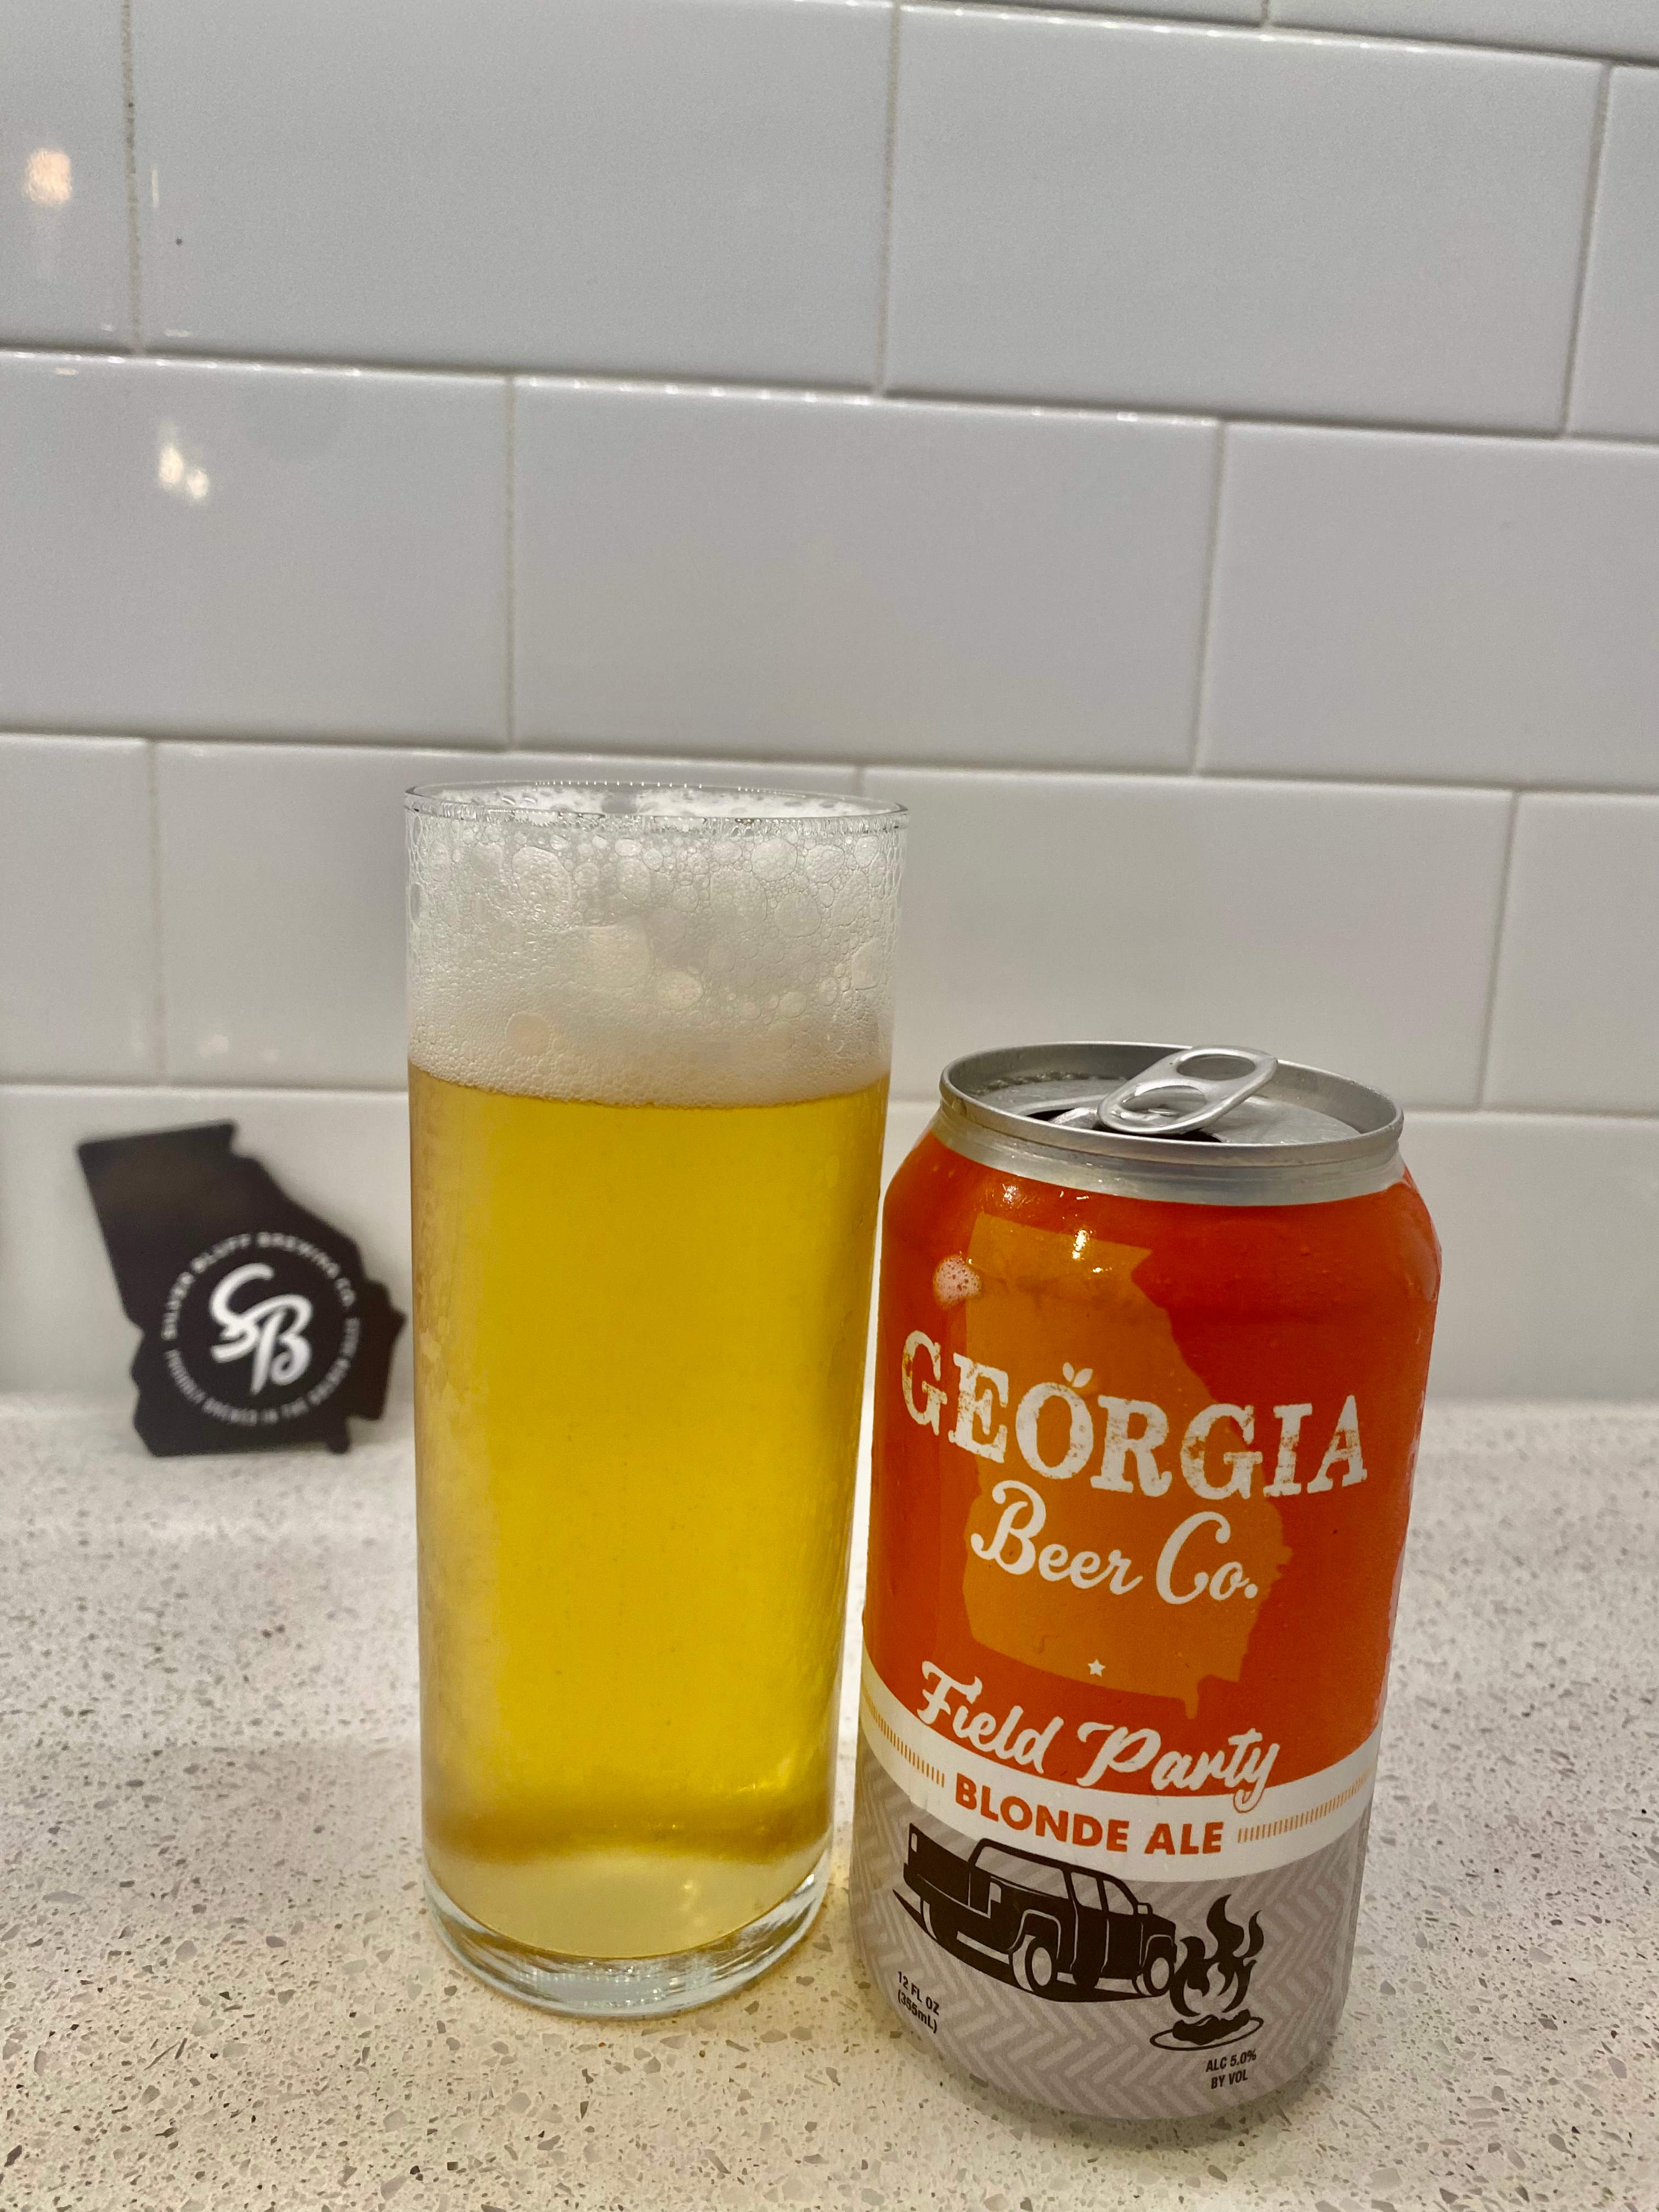 Georgia Beer Co. Field Party